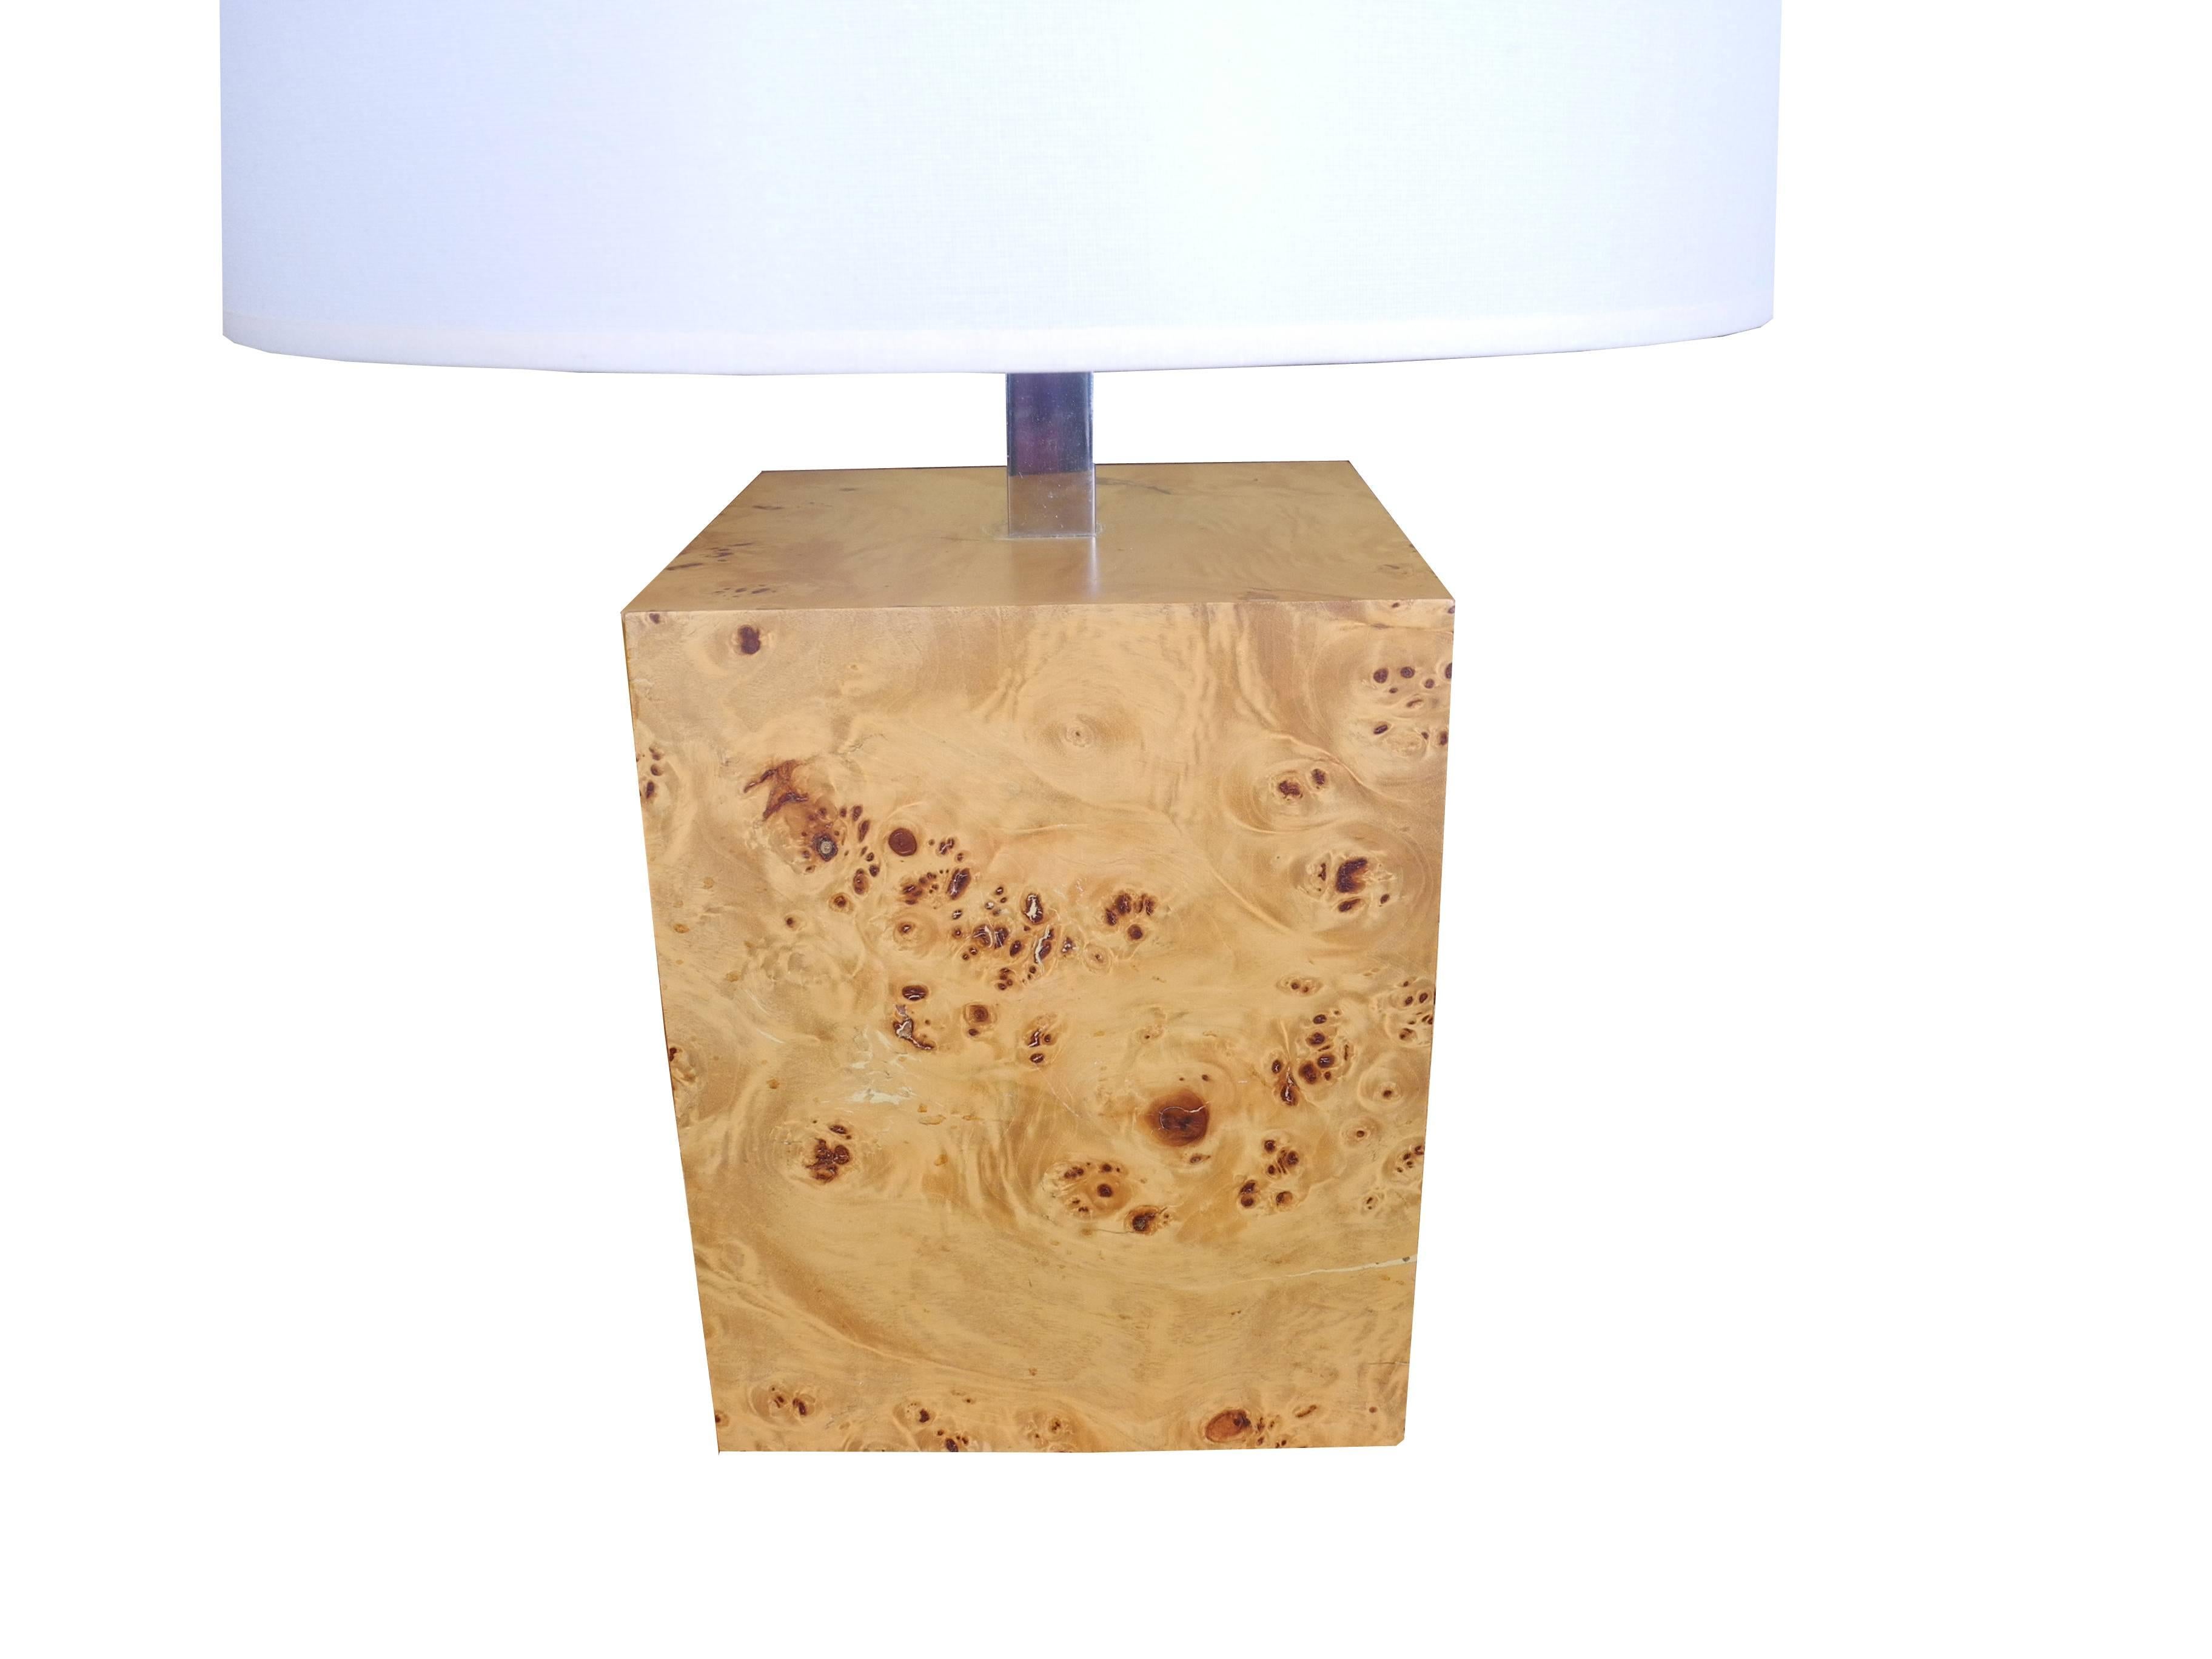 This modern lamp is made of a burled veneer with chrome hardware in the style of Milo Baughman. The cube measures 8 x 8 by 10